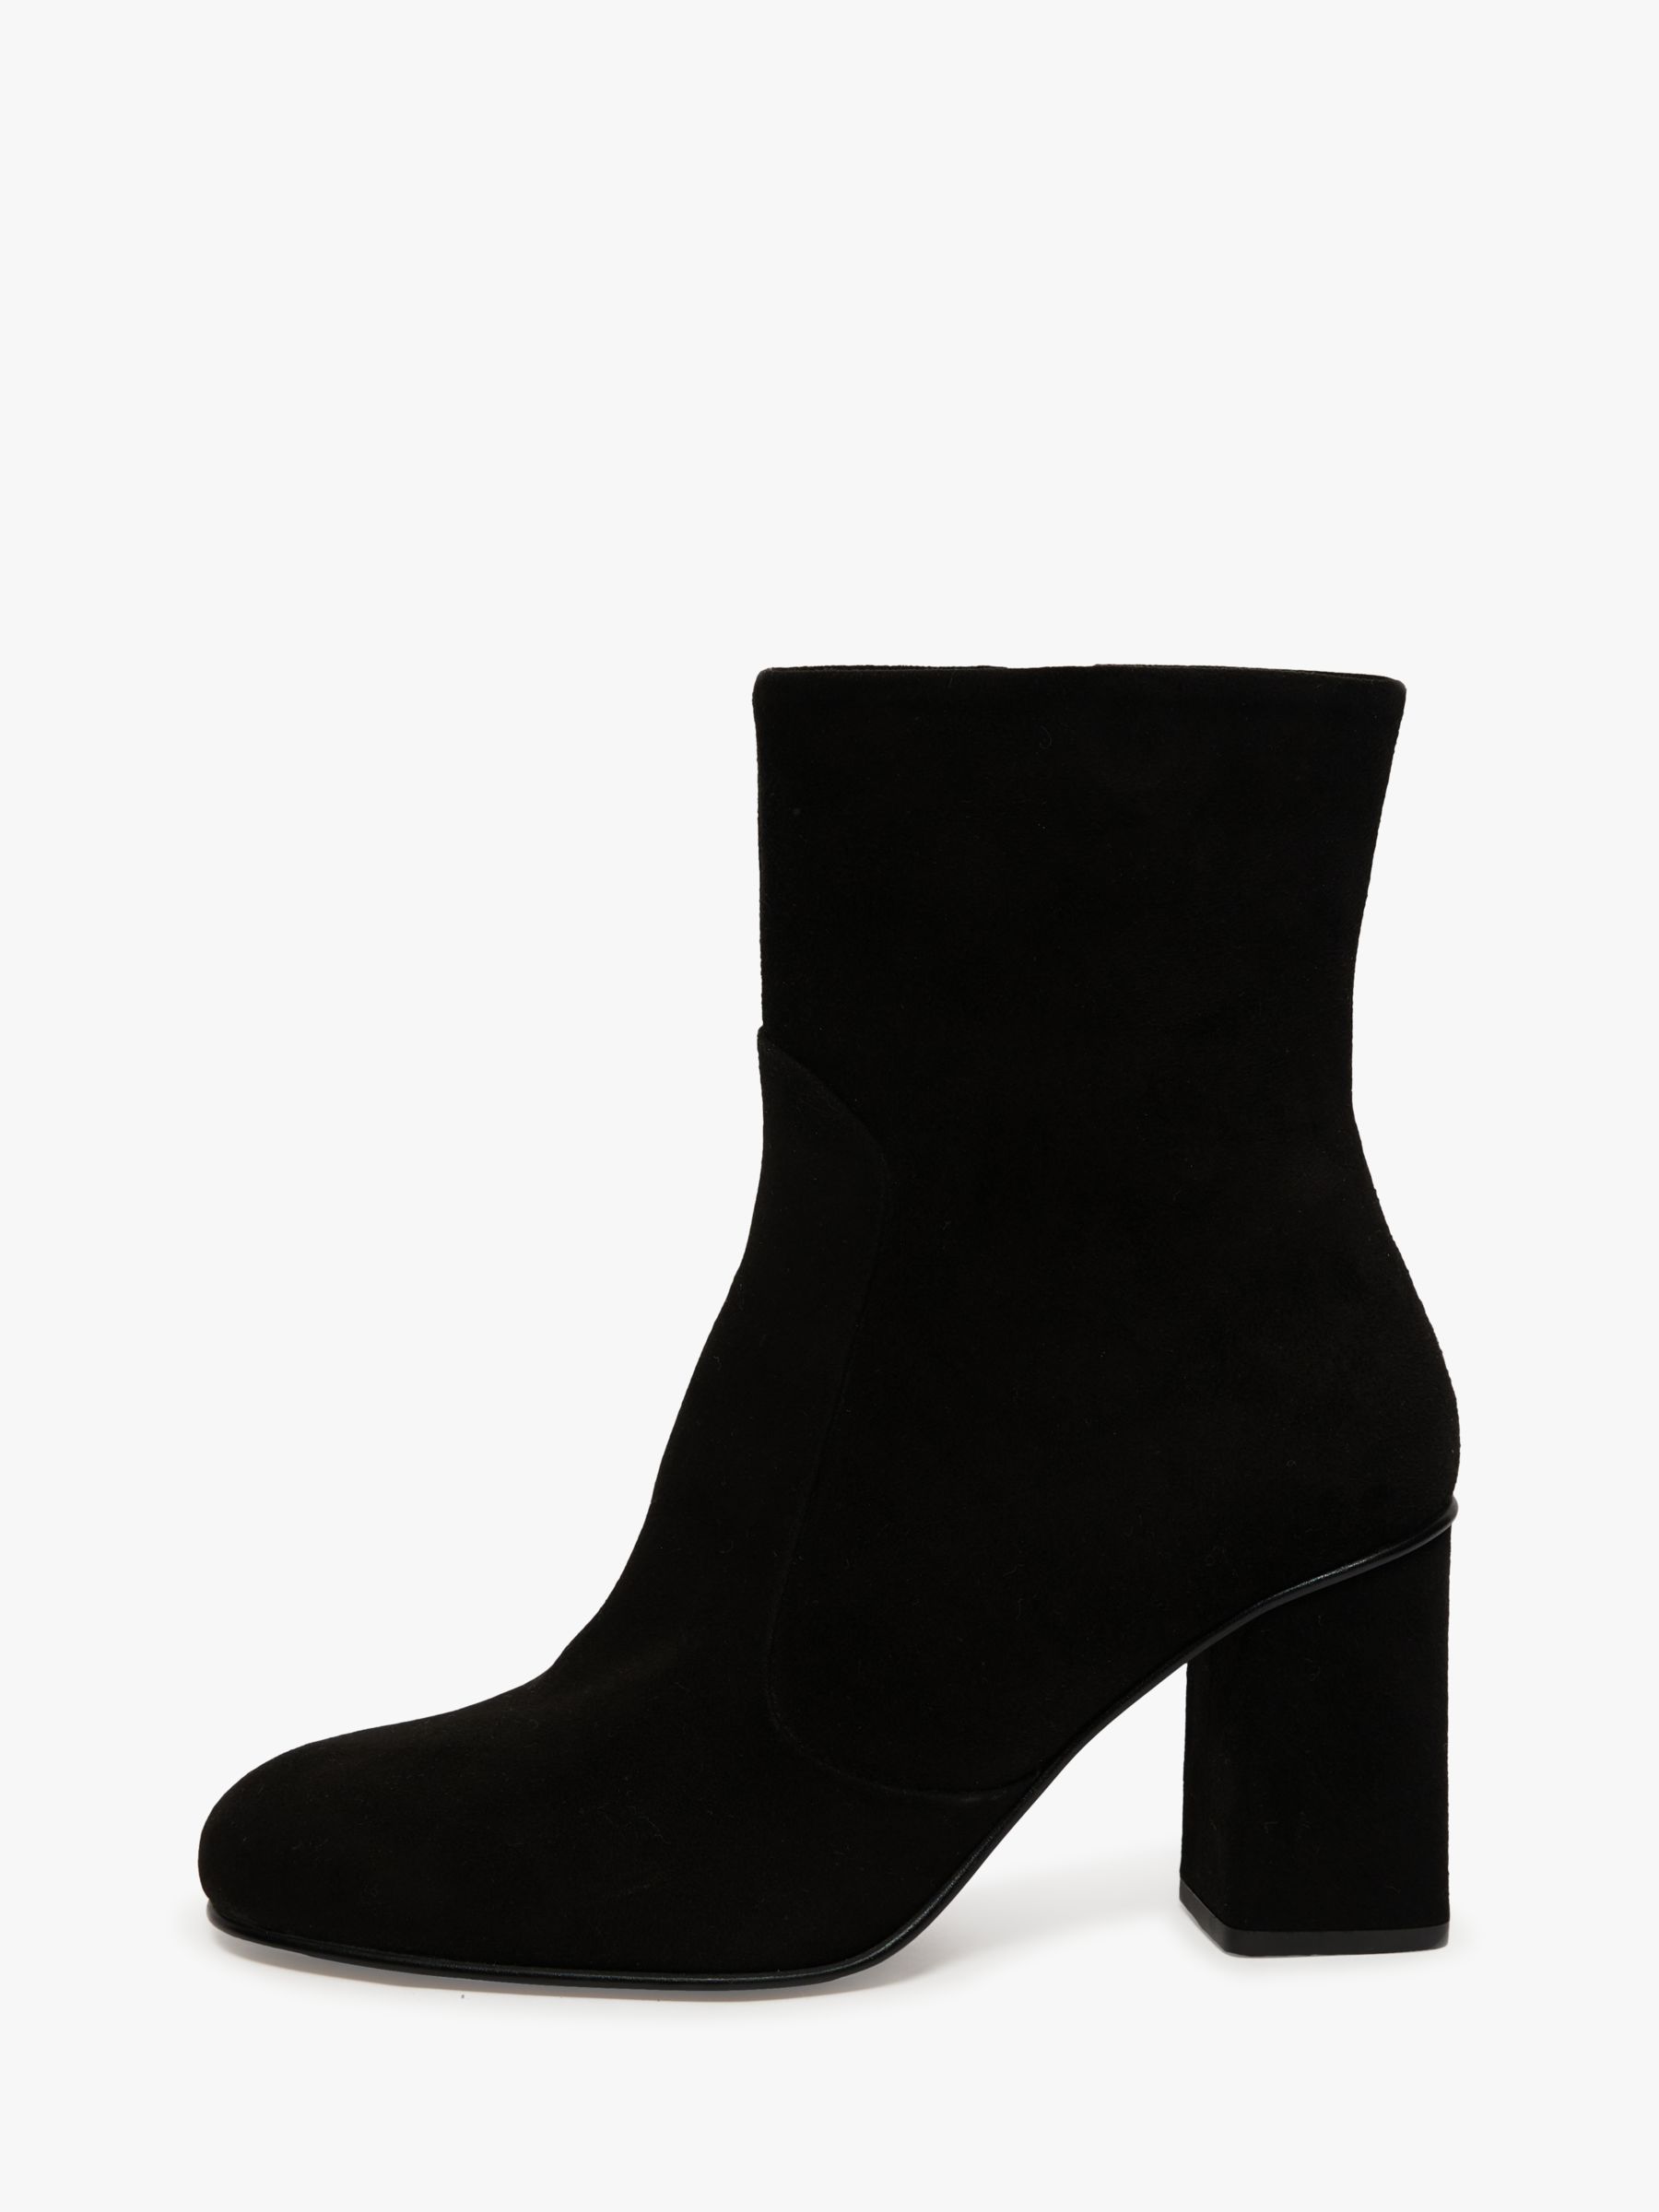 Jigsaw April Suede Heeled Ankle Boots, Black, 3